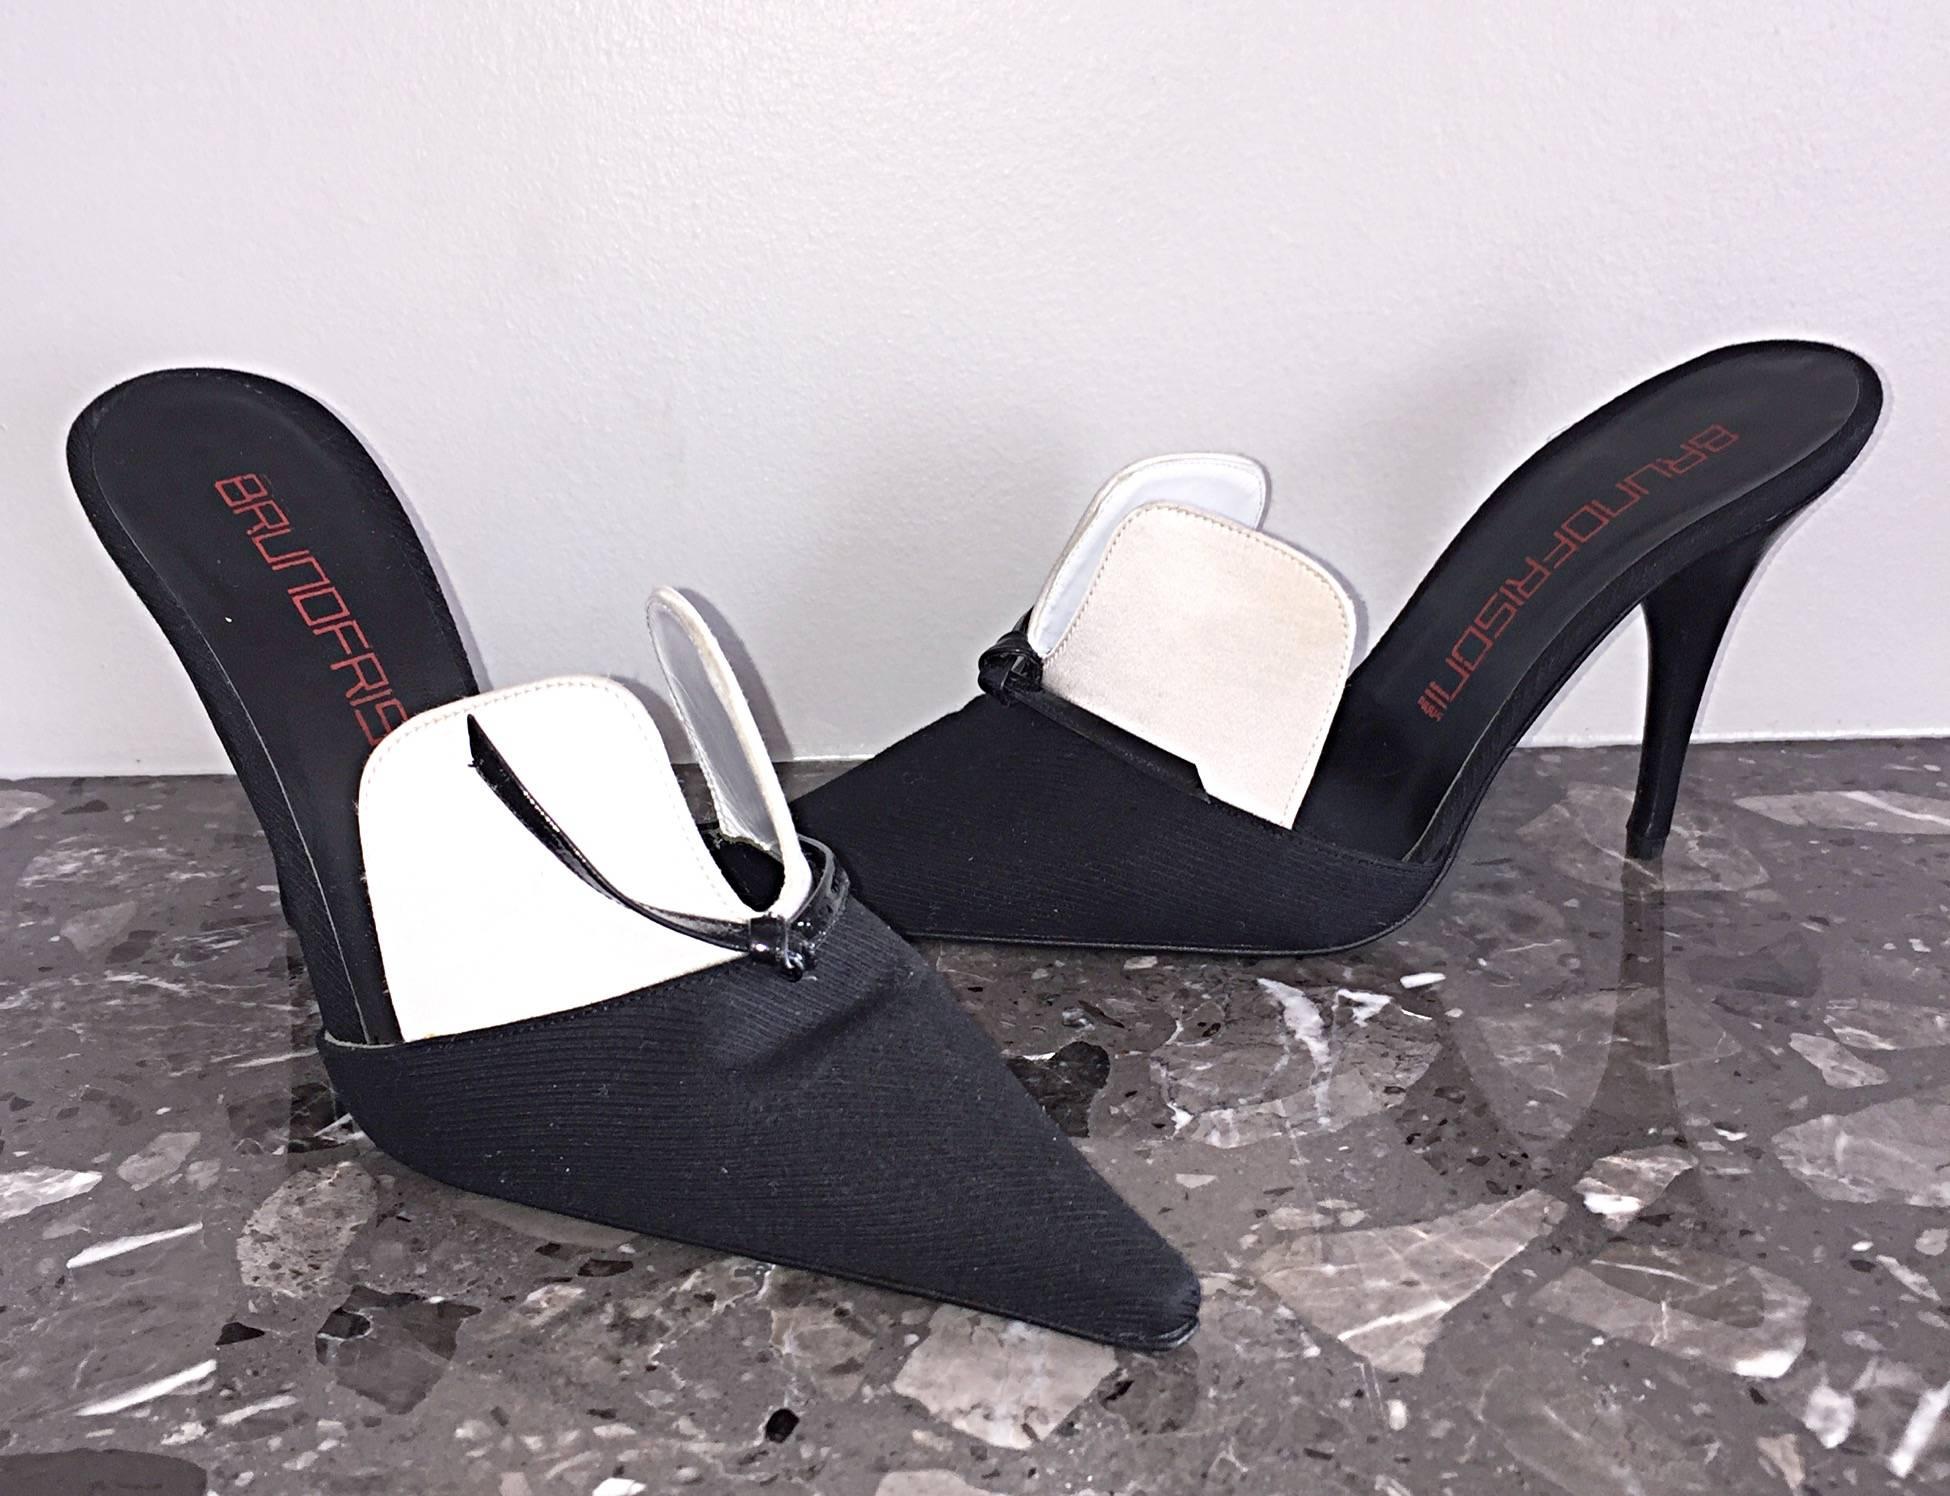 Spectacular brand new Bruno Frisoni black and white 'tuxedo' style heels! Frisoni, currently the chief designer for Roger Vivier, began his fashion career in 1980, at Jean-Louis Schrerrer. Following, he collaborated with Trussardi, Givenchy, and